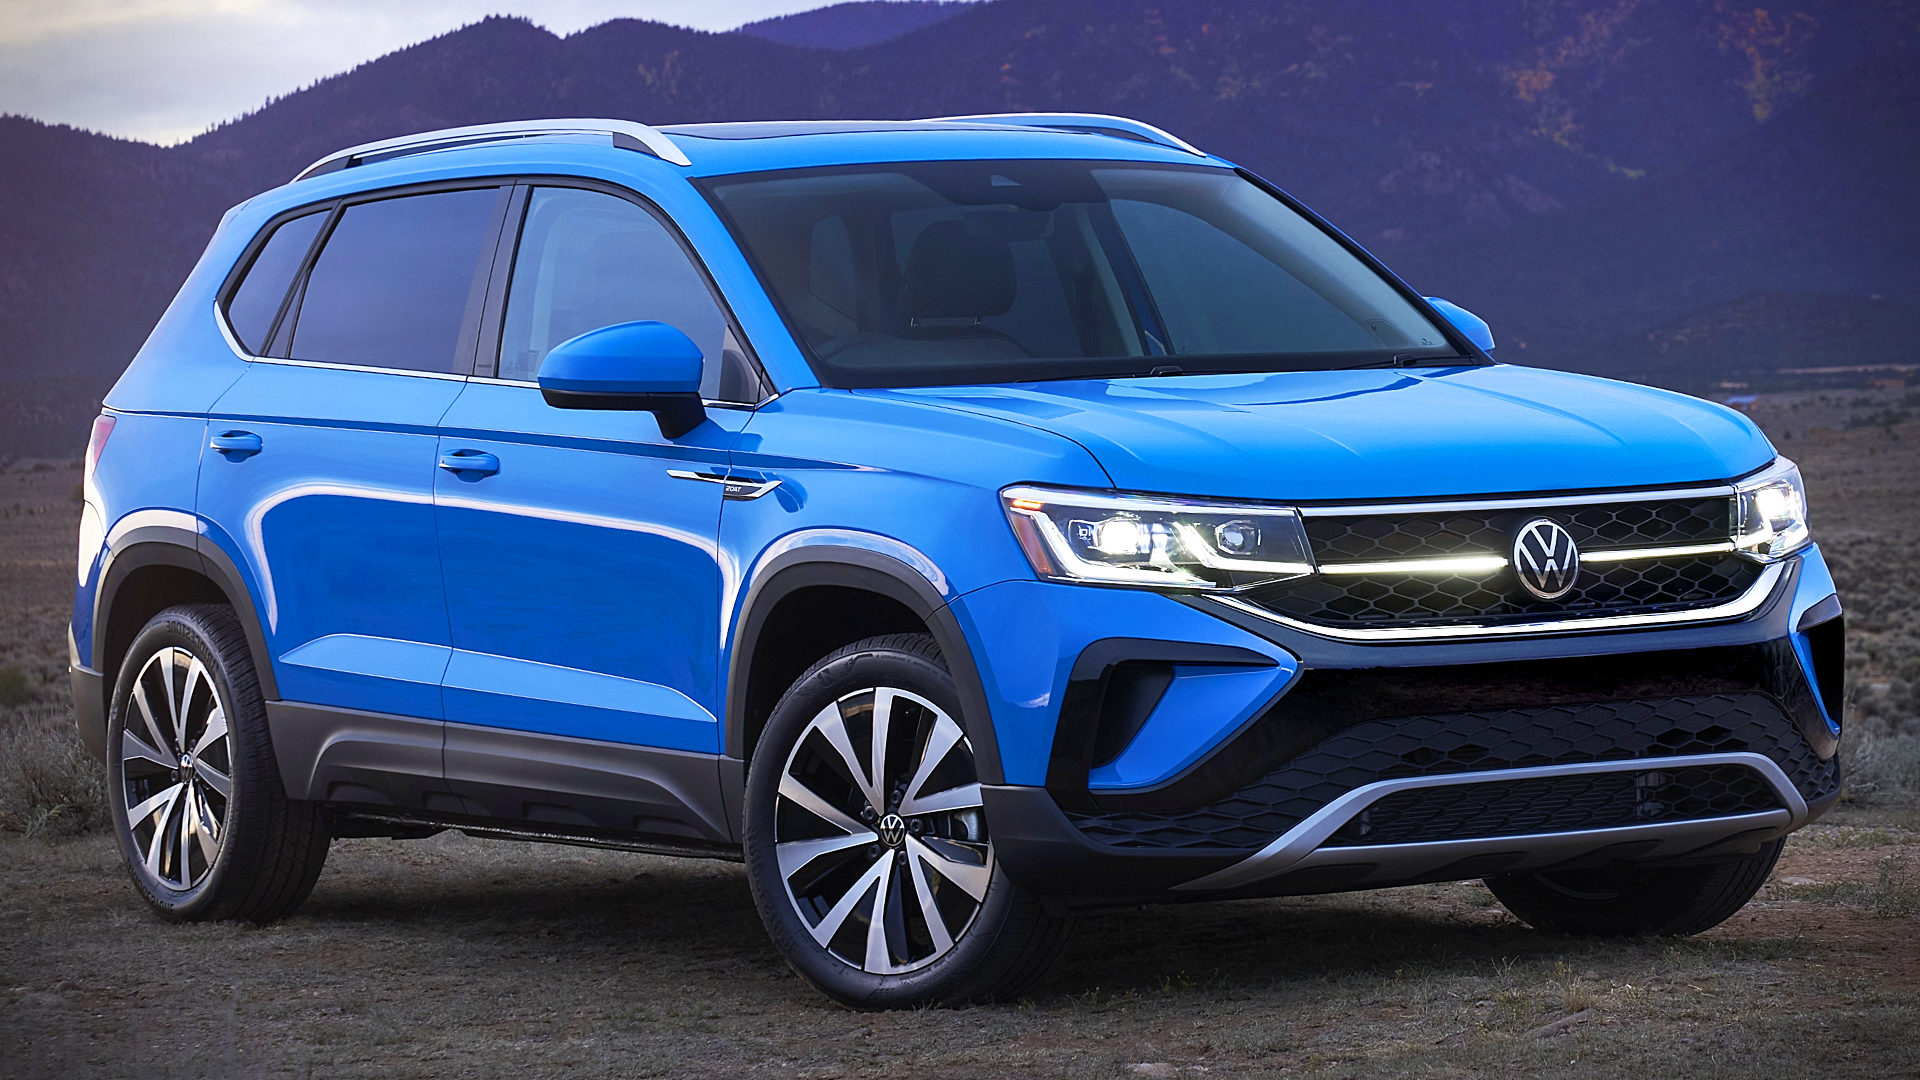 2022 Volkswagen Taos debuts with more space and tech